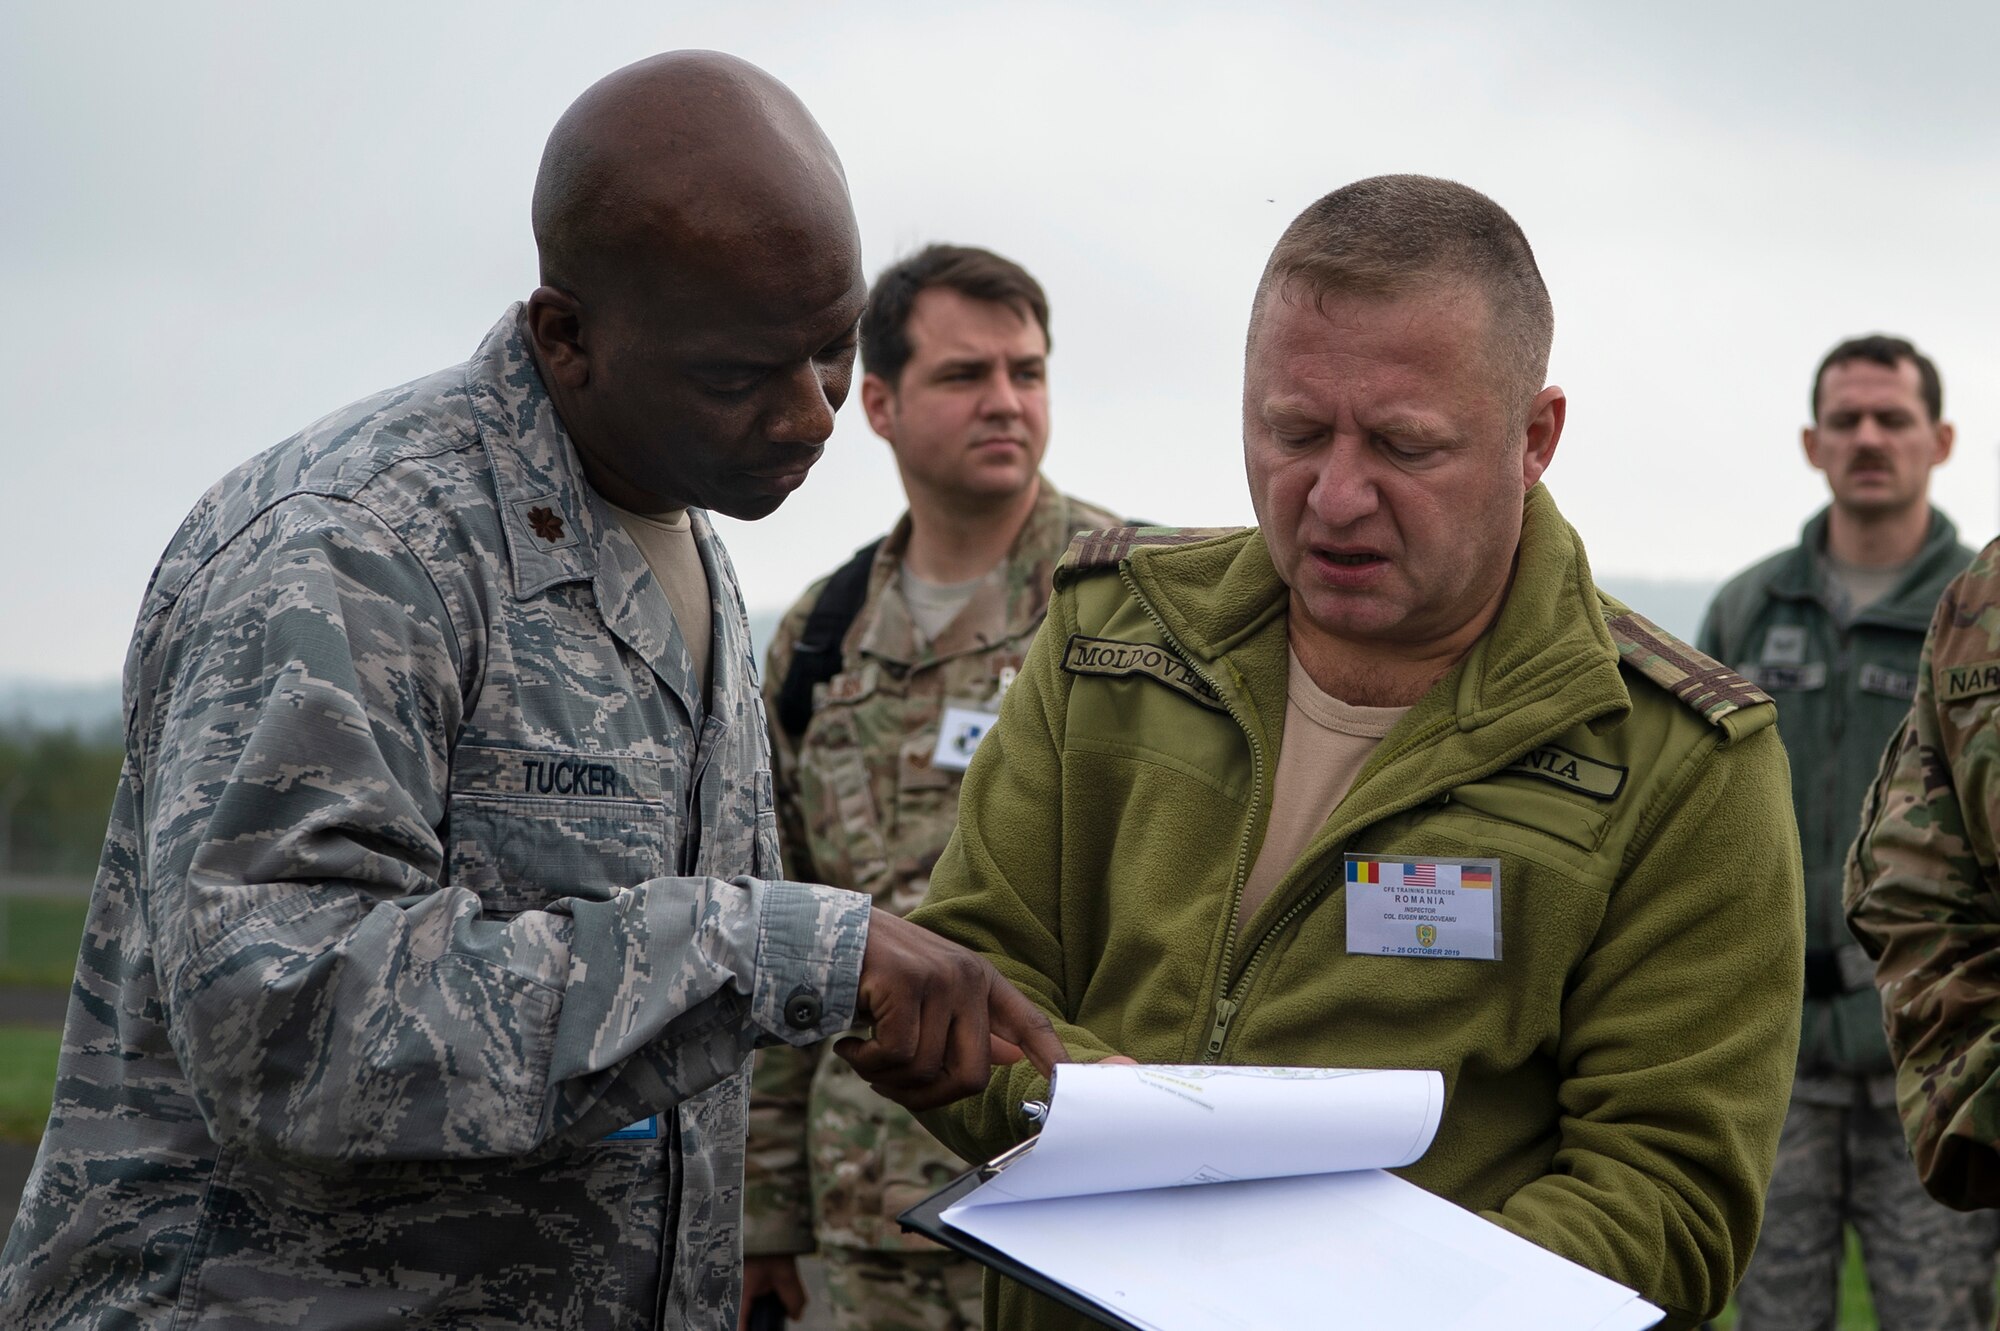 U.S. Air Force Airmen escort Romanian inspection team members during a Conventional Armed Forces in Europe Treaty exercise at Spangdahlem Air Base, Germany, Oct. 24, 2019. The CFE Treaty limits the number of battle tanks, artillery pieces, armored combat vehicles, combat aircraft, and attack helicopters each participating state party can have within the European Area of Application. The exercise was held to make sure the wing is ready for a potential real-world inspection, which can happen with as little as 43 hours' notice. (U.S. Air Force photo by Airman 1st Class Valerie Seelye)